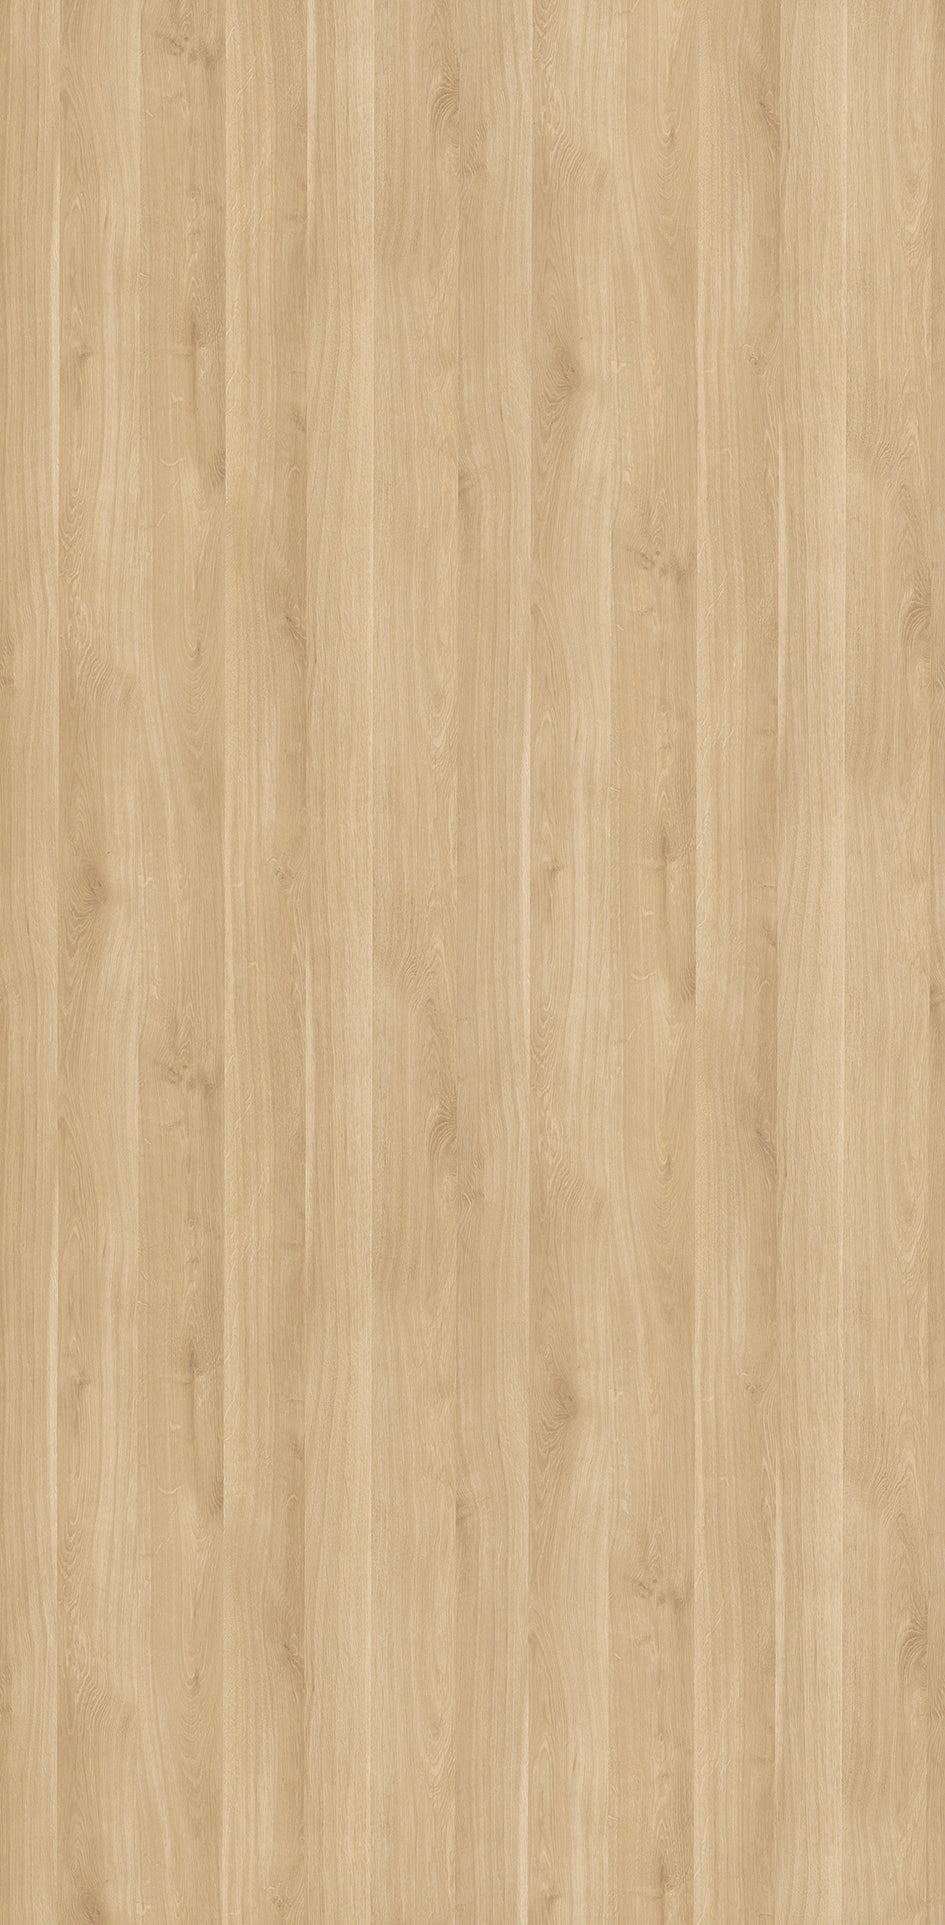 AKY 14156CY31 HPL AICA NATURAL FIRM OAK